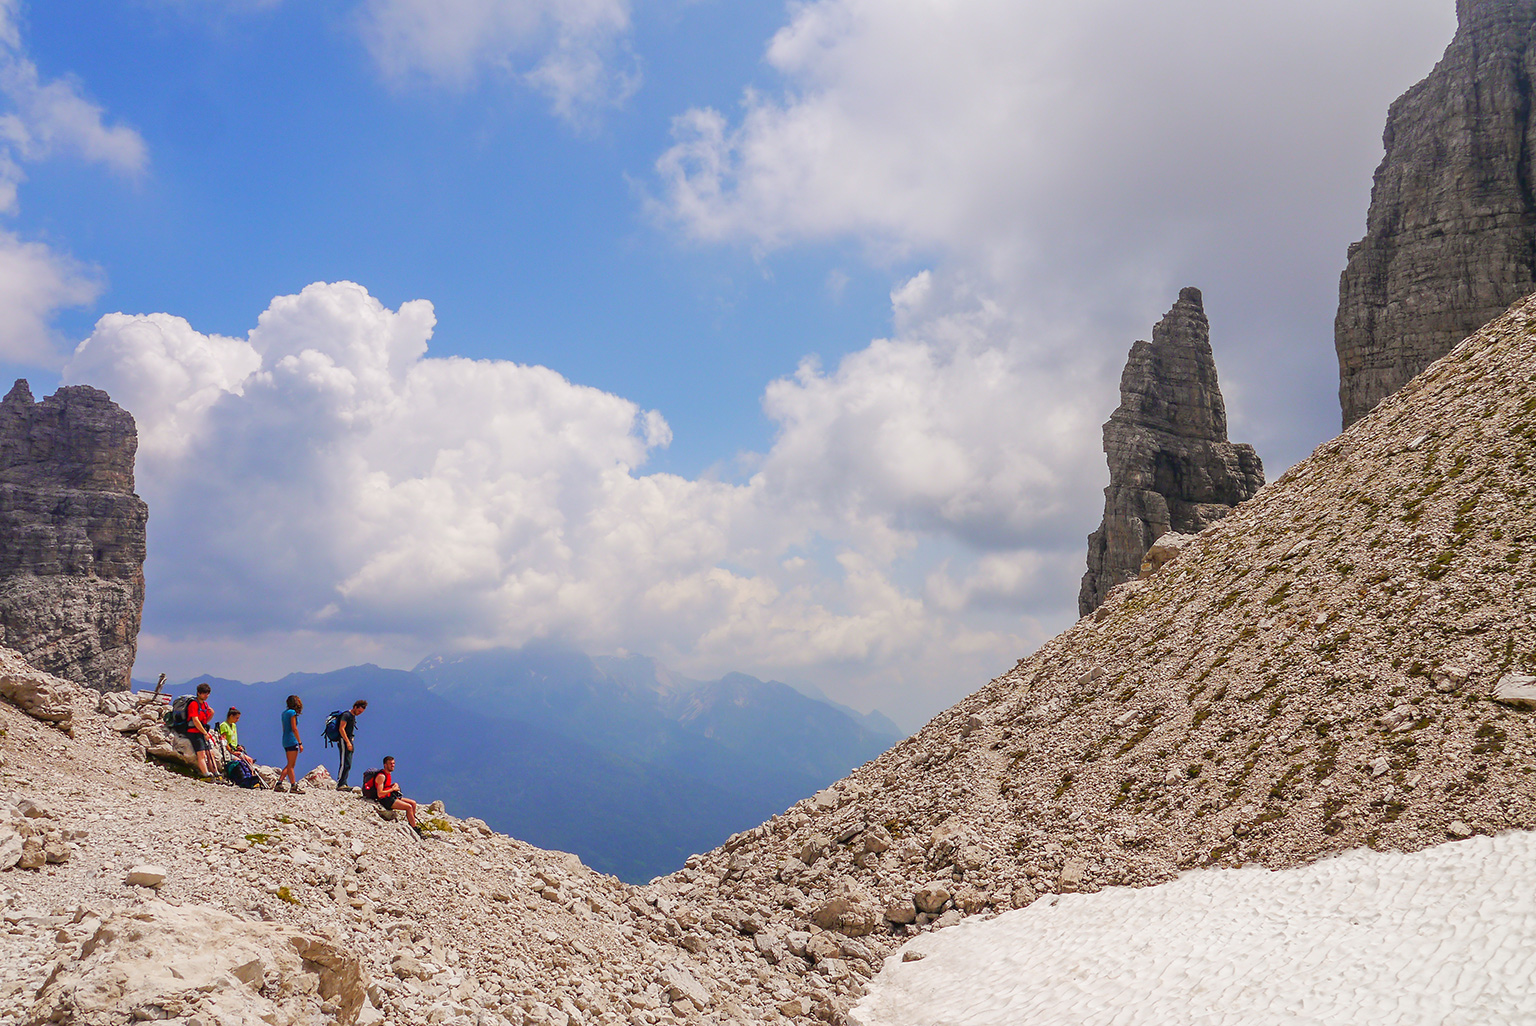 Group of hikers resting from mountain climb in the Dolomites Italy